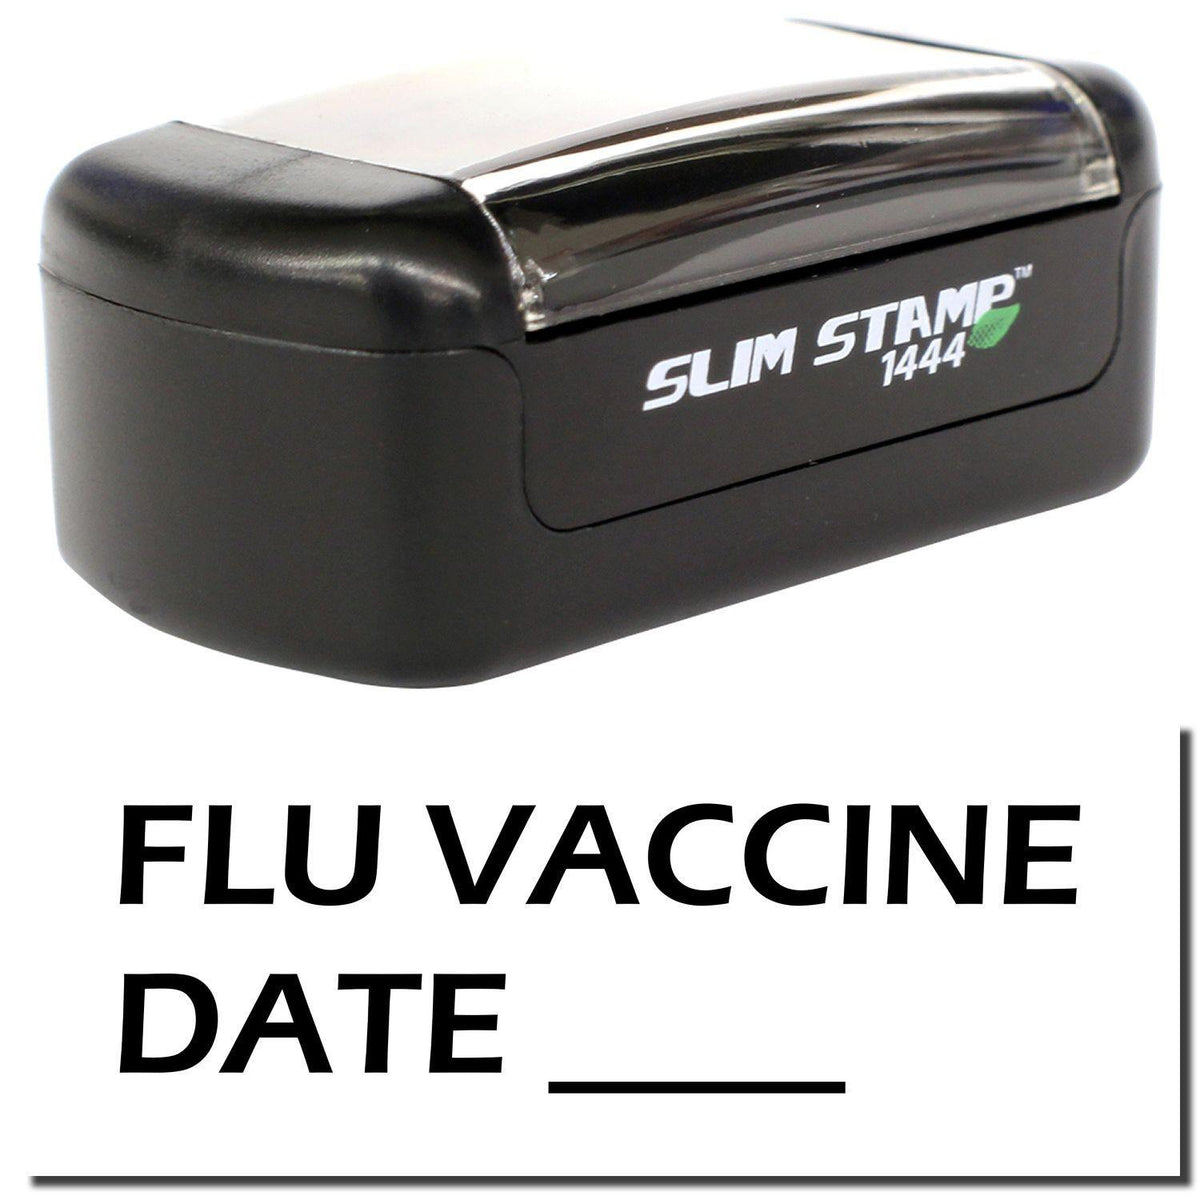 A stock office pre-inked stamp with a stamped image showing how the text &quot;FLU VACCINE DATE&quot; with a line is displayed after stamping.